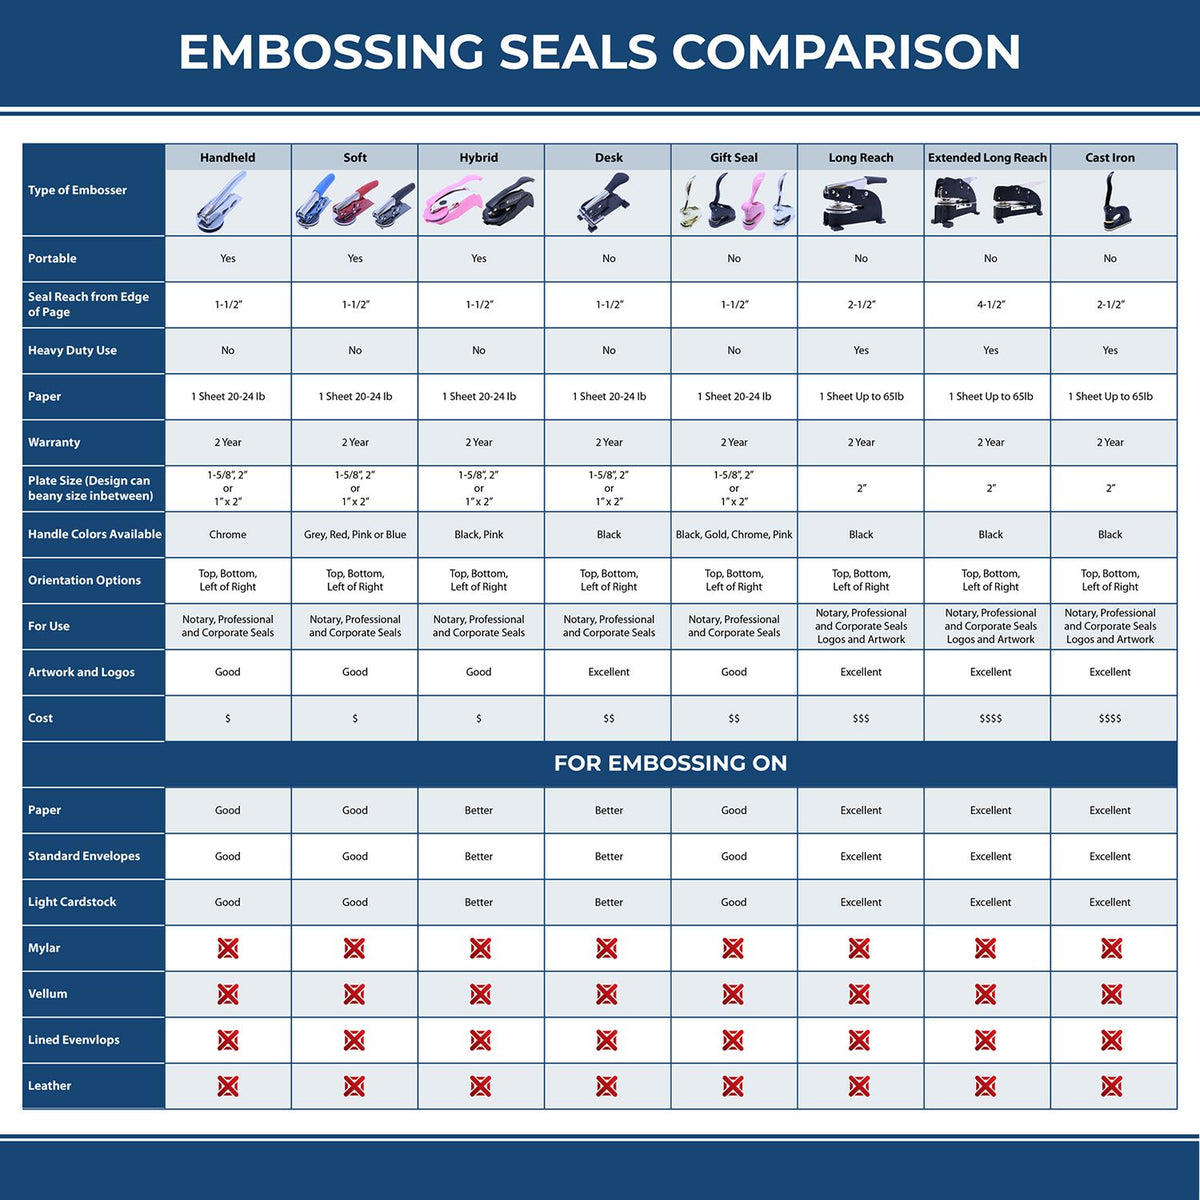 A comparison chart for the different types of mount models available for the State of Wyoming Extended Long Reach Geologist Seal